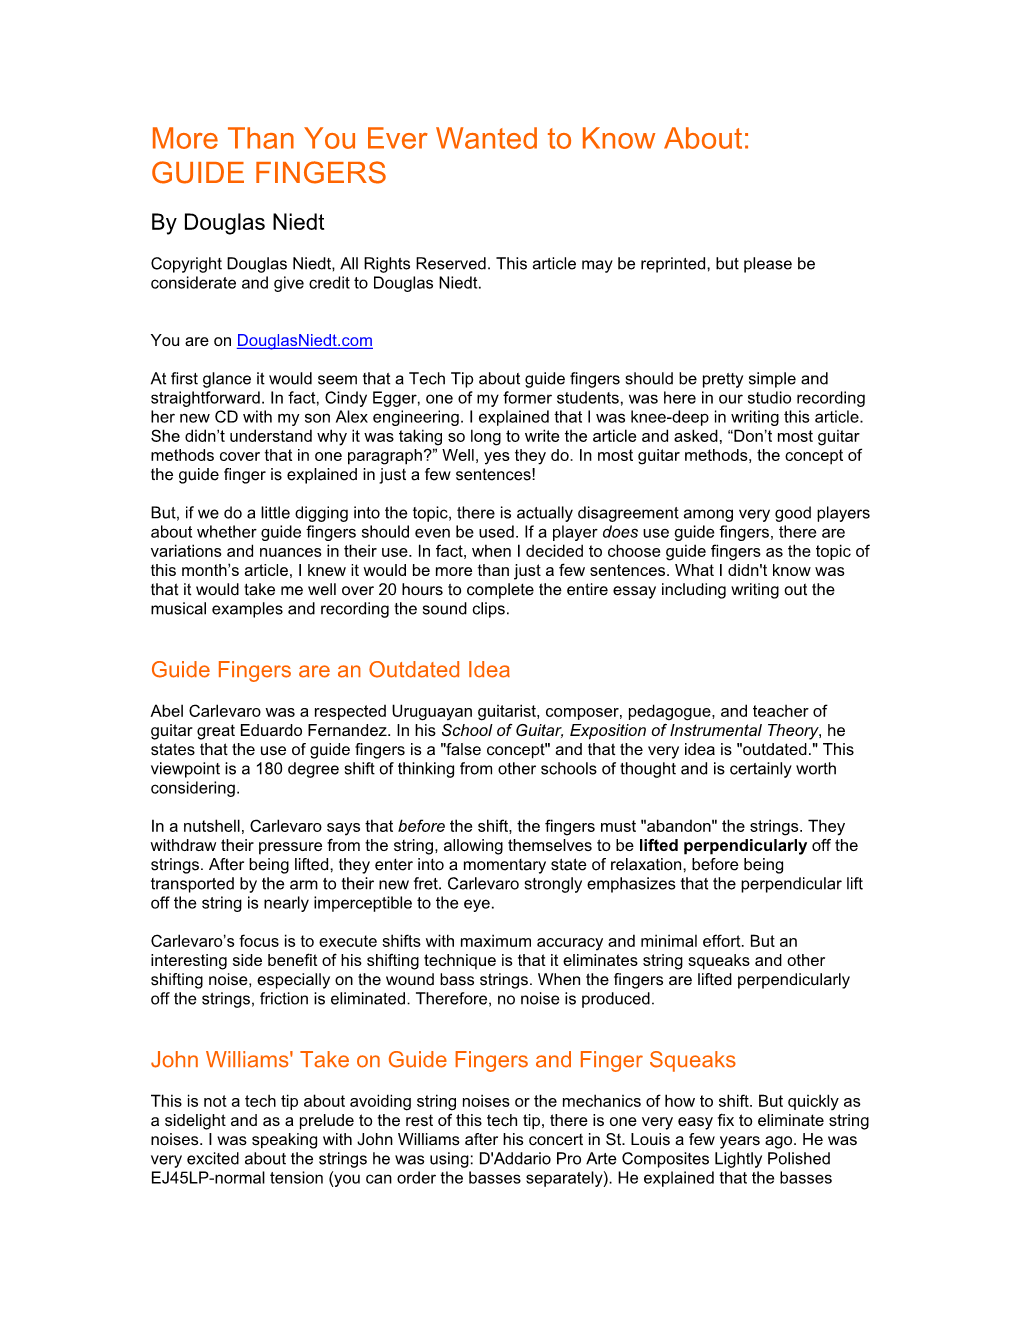 More Than You Ever Wanted to Know About: GUIDE FINGERS